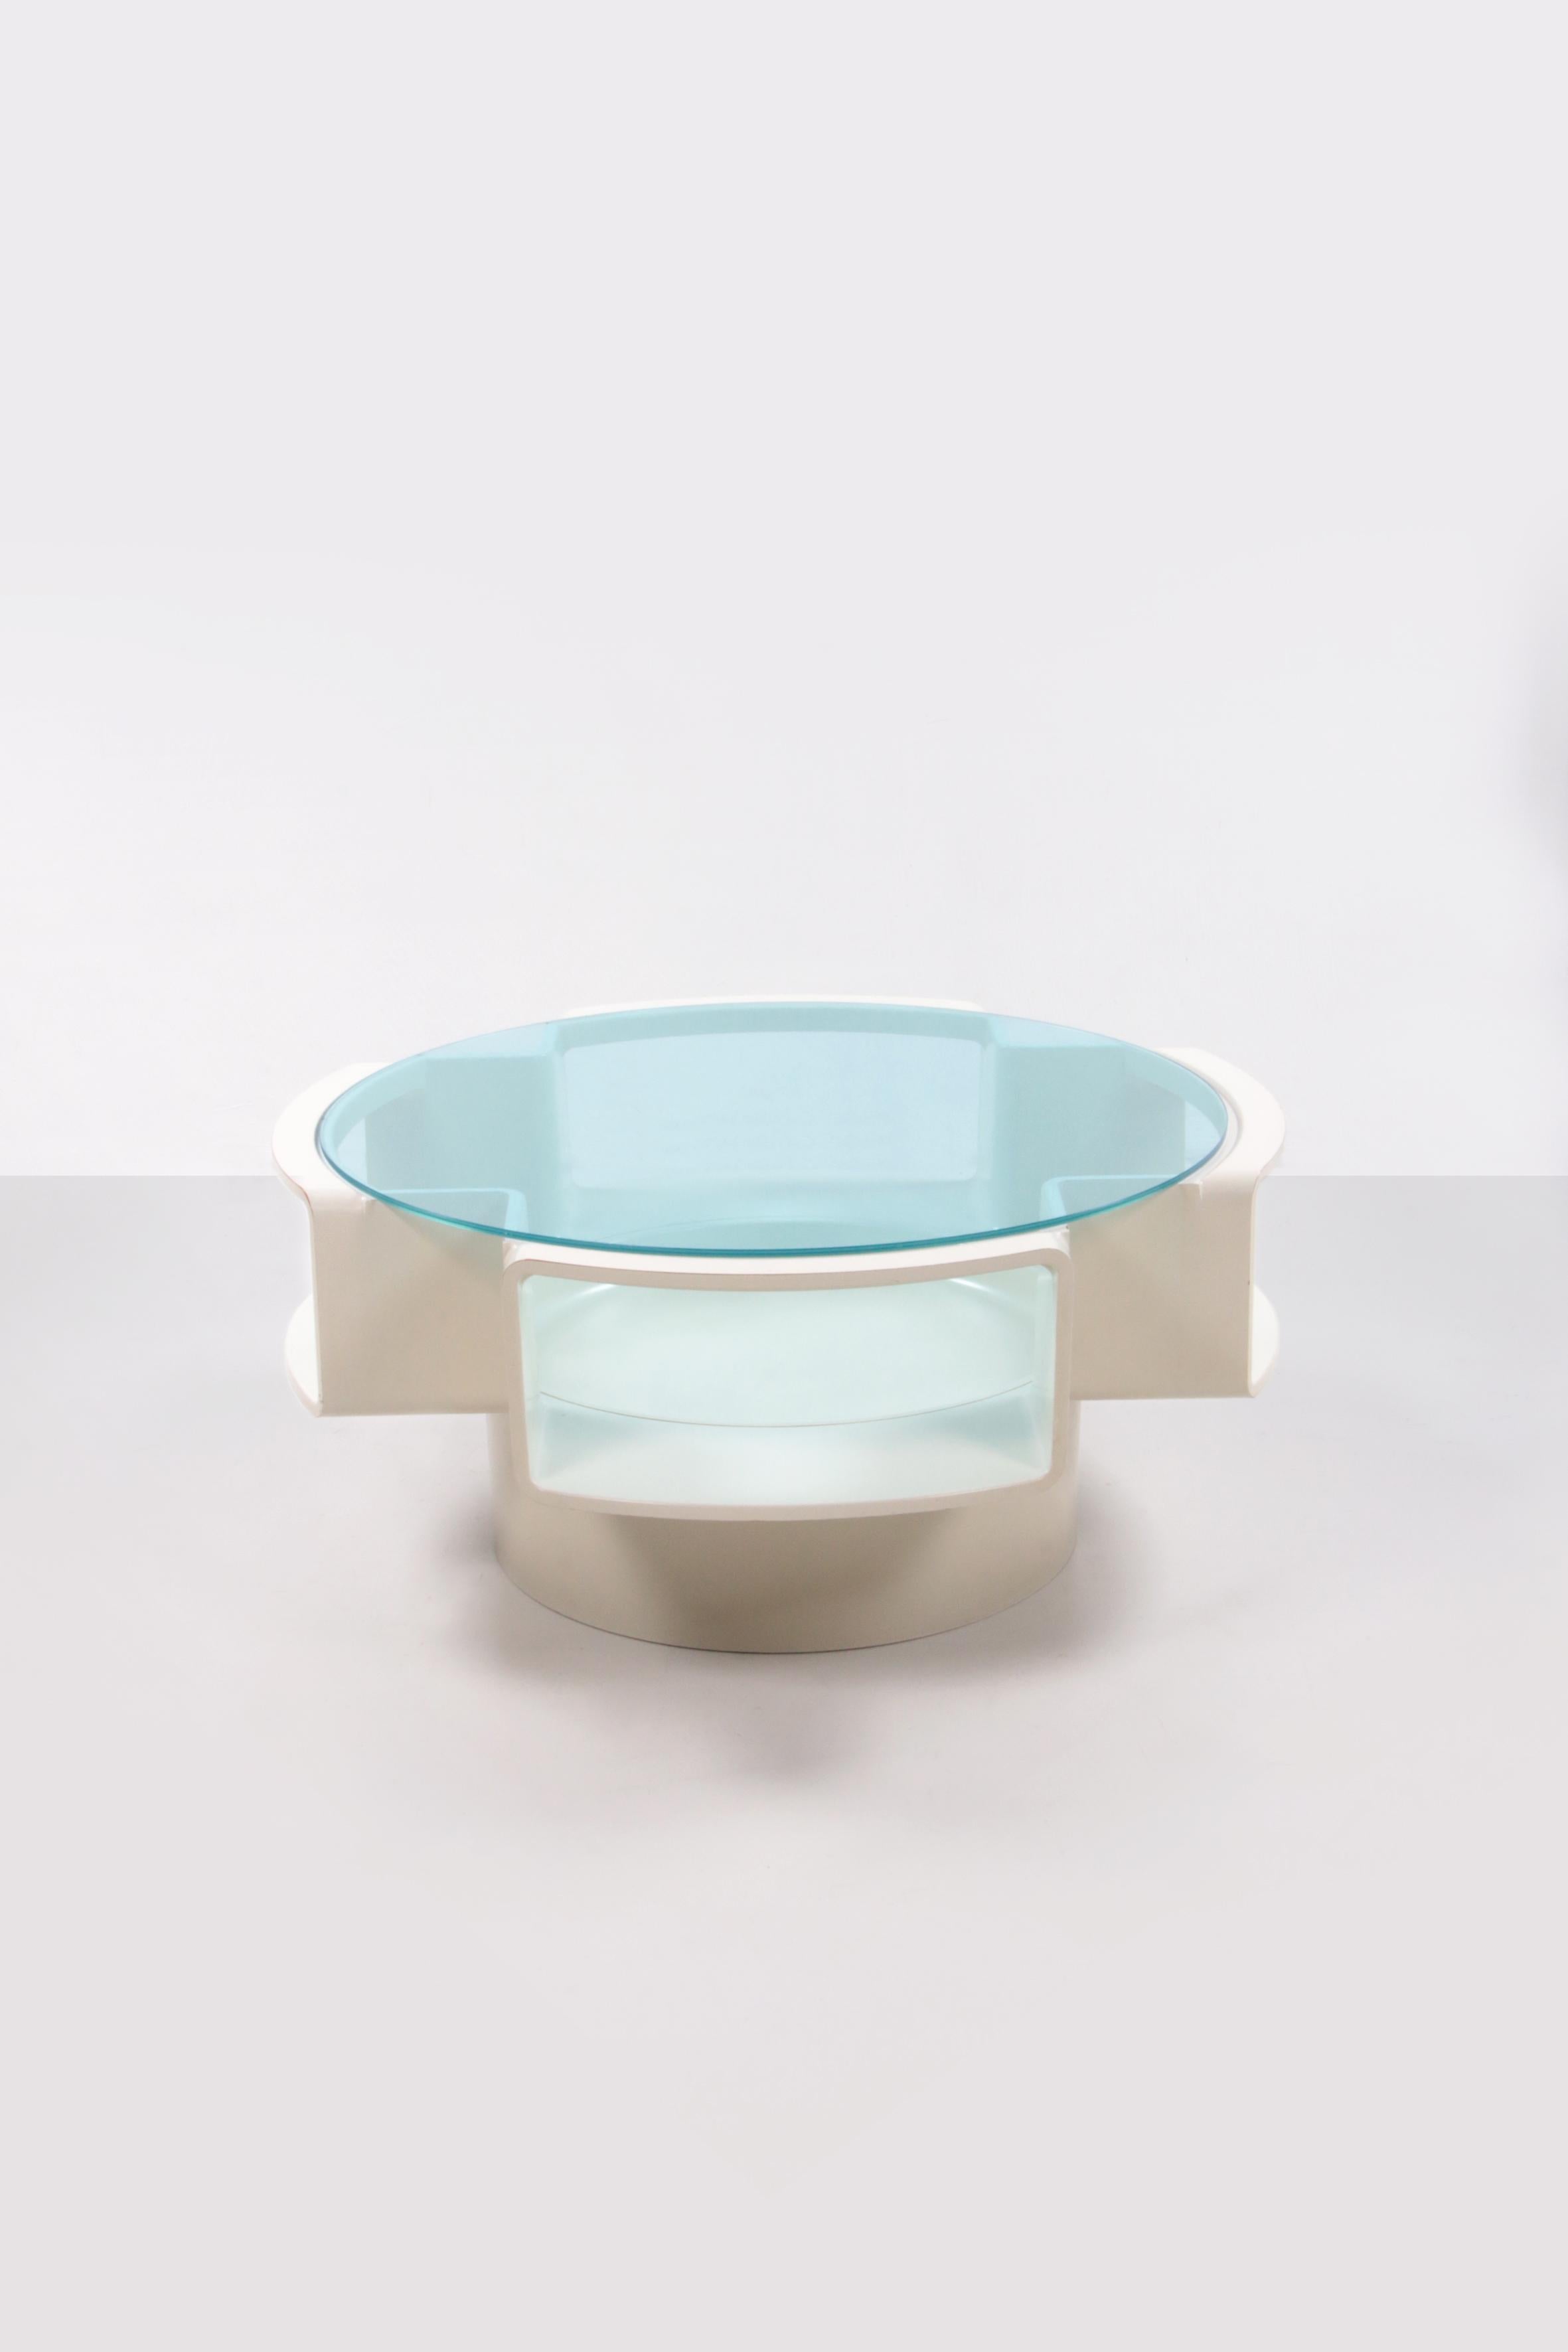 Space age design UFO coffee table by Jean Maneval for Mobilier de France, 1970s
This is a beautiful Spage Age coffee table with beautiful blue glass. This special item is a design by Jean Maneval.

Producer: Furniture de France.

The tableau in